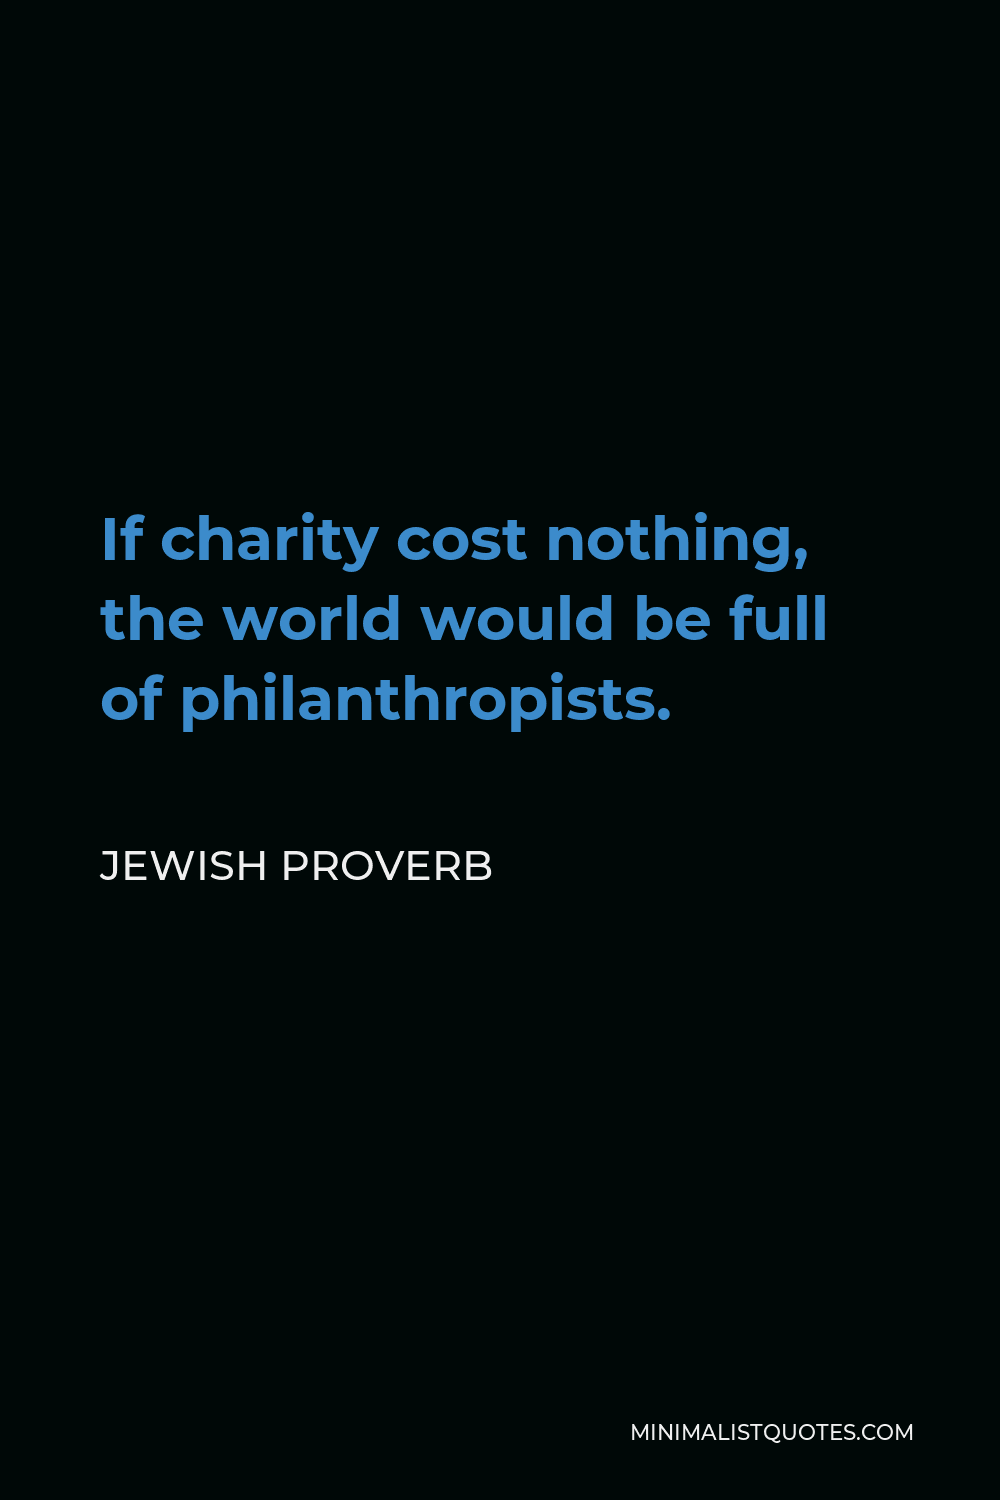 Jewish Proverb Quote - If charity cost nothing, the world would be full of philanthropists.